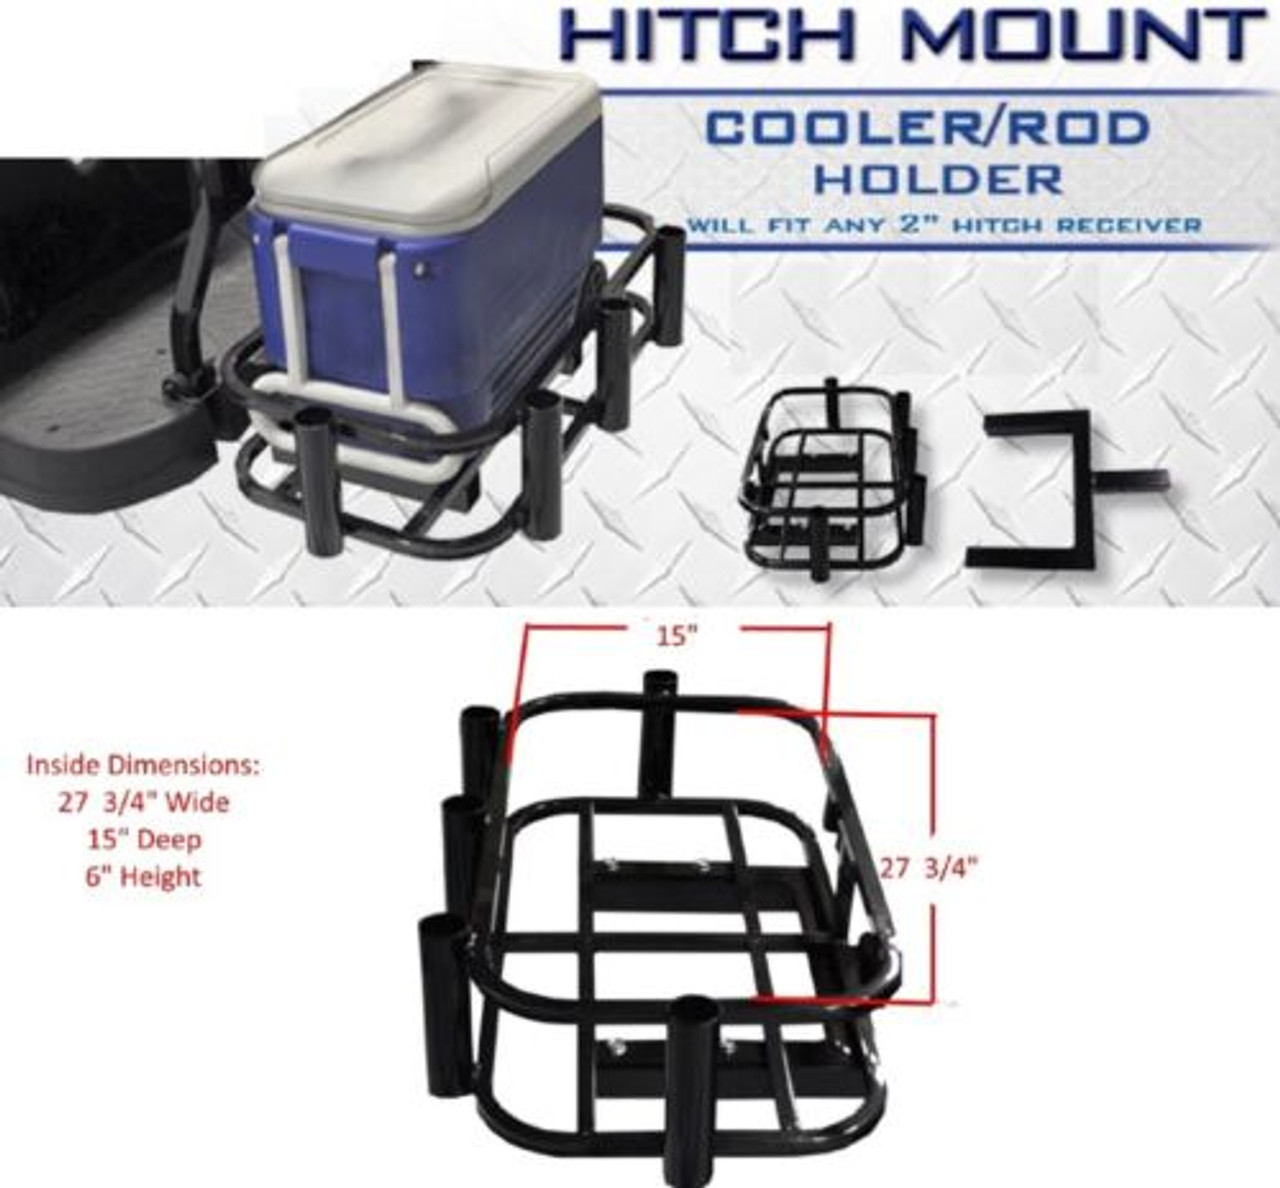 GTW Hitch Mount Cooler/ Rod Holder Rack for Golf Carts with Receiver